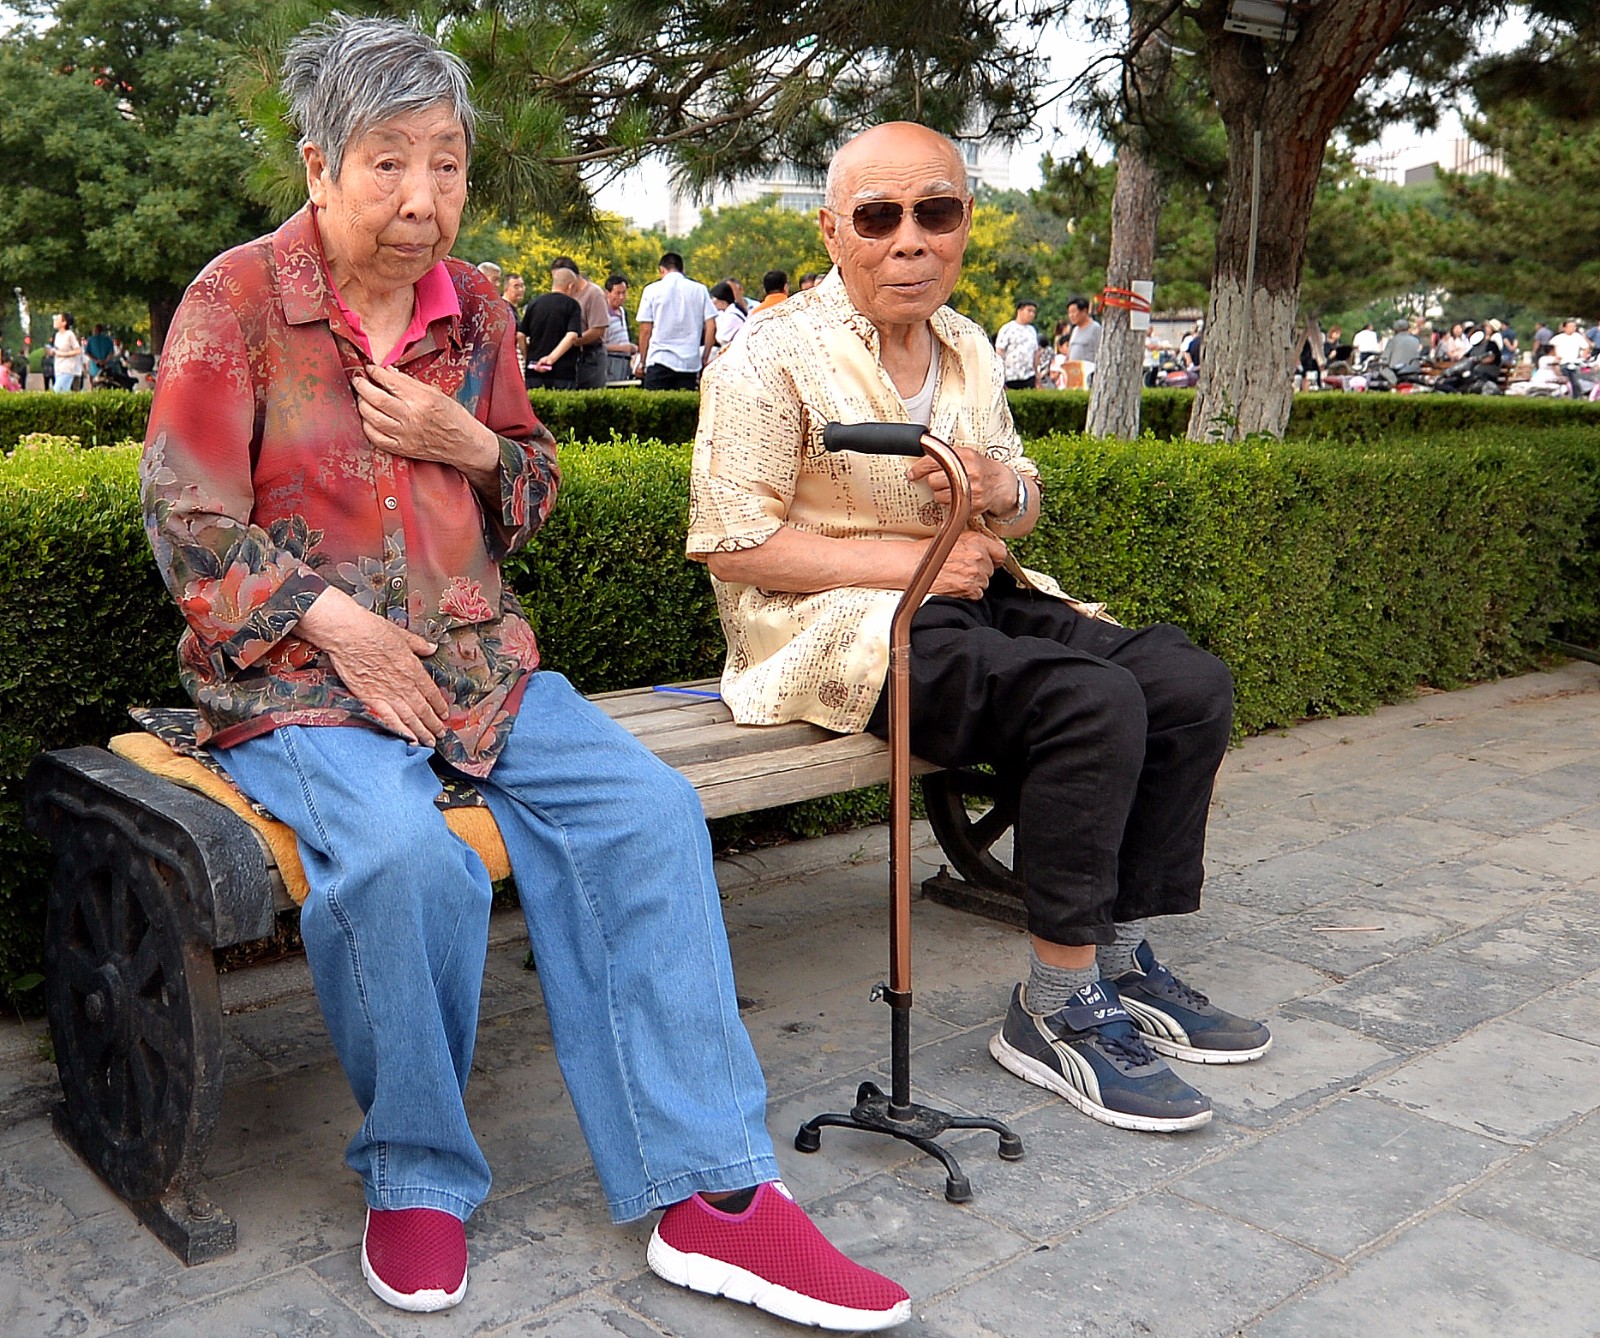 Elderly Man In Wheelchair Back View Picture And HD Photos | Free ...